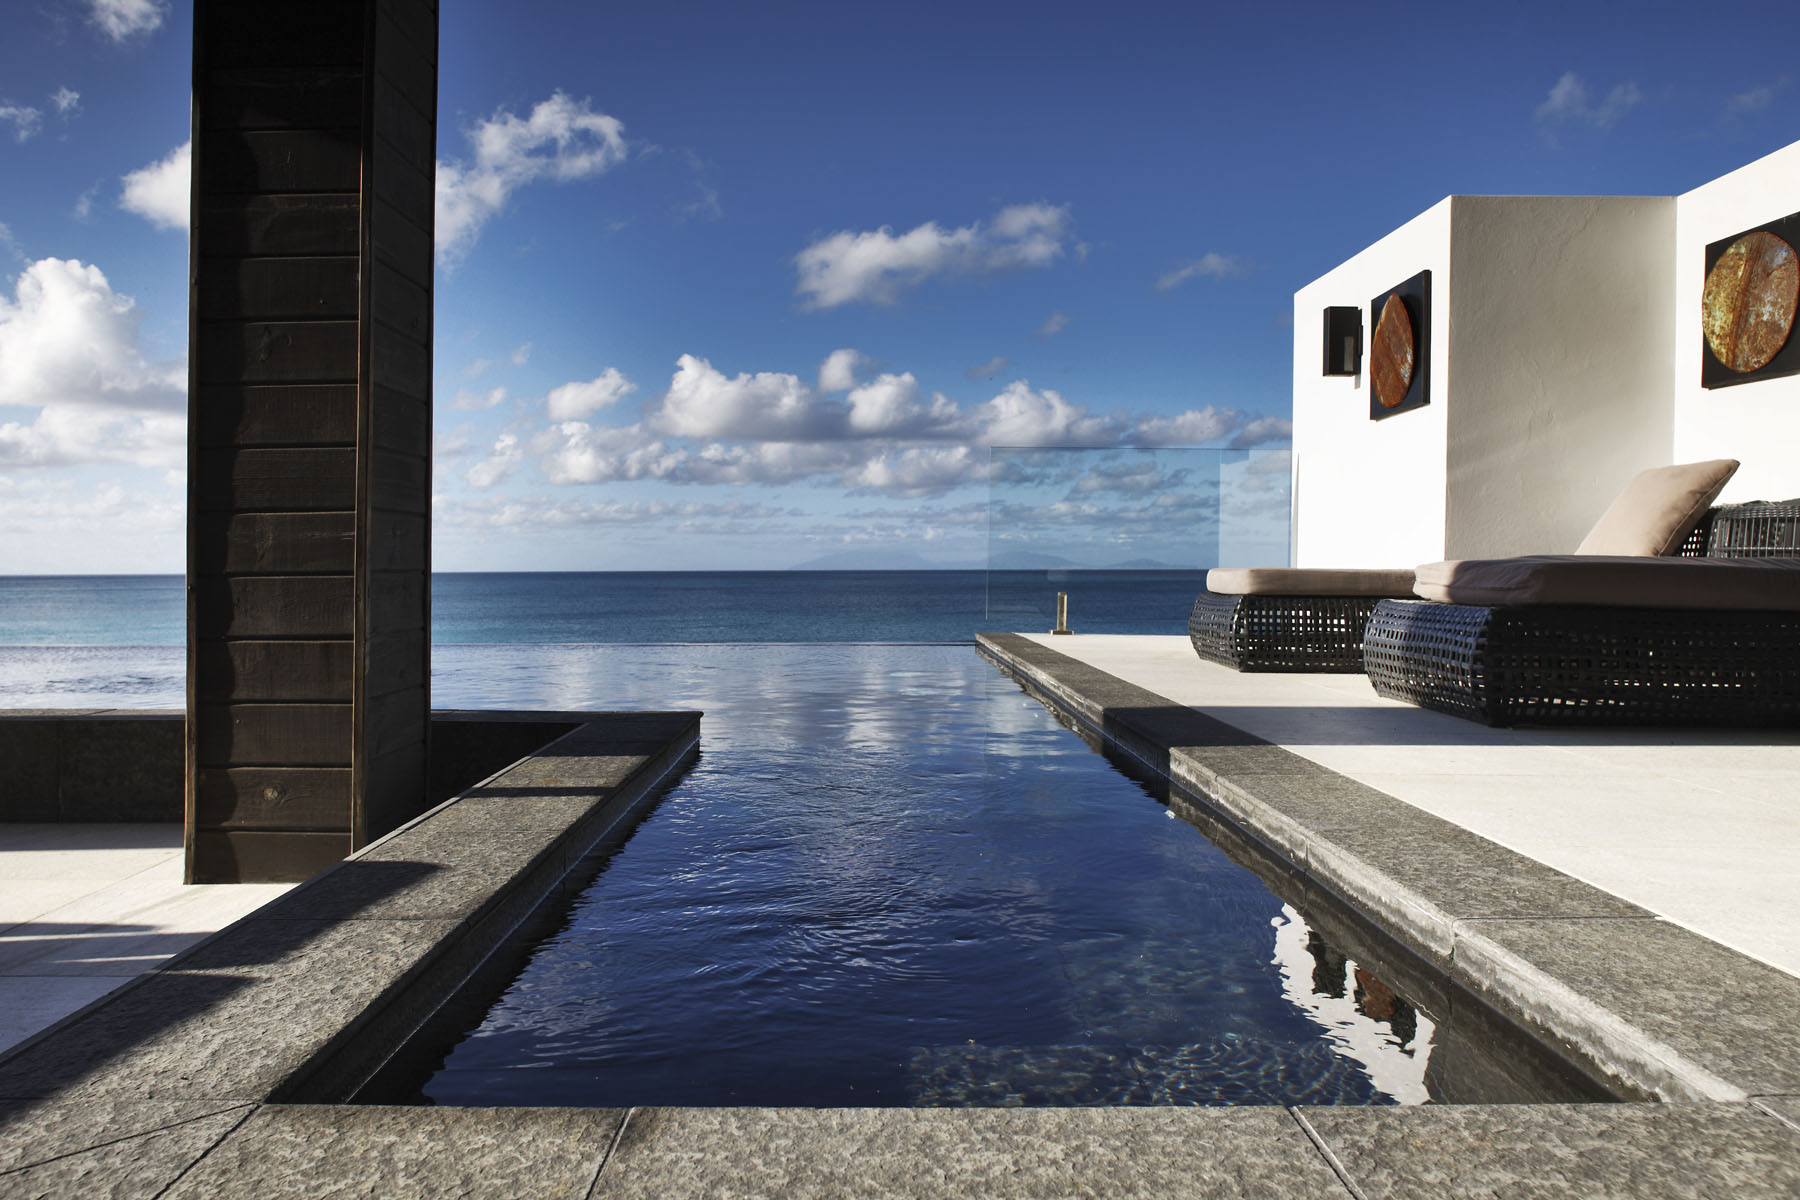 Step into the crystal Caribbean waters from your beachfront villa